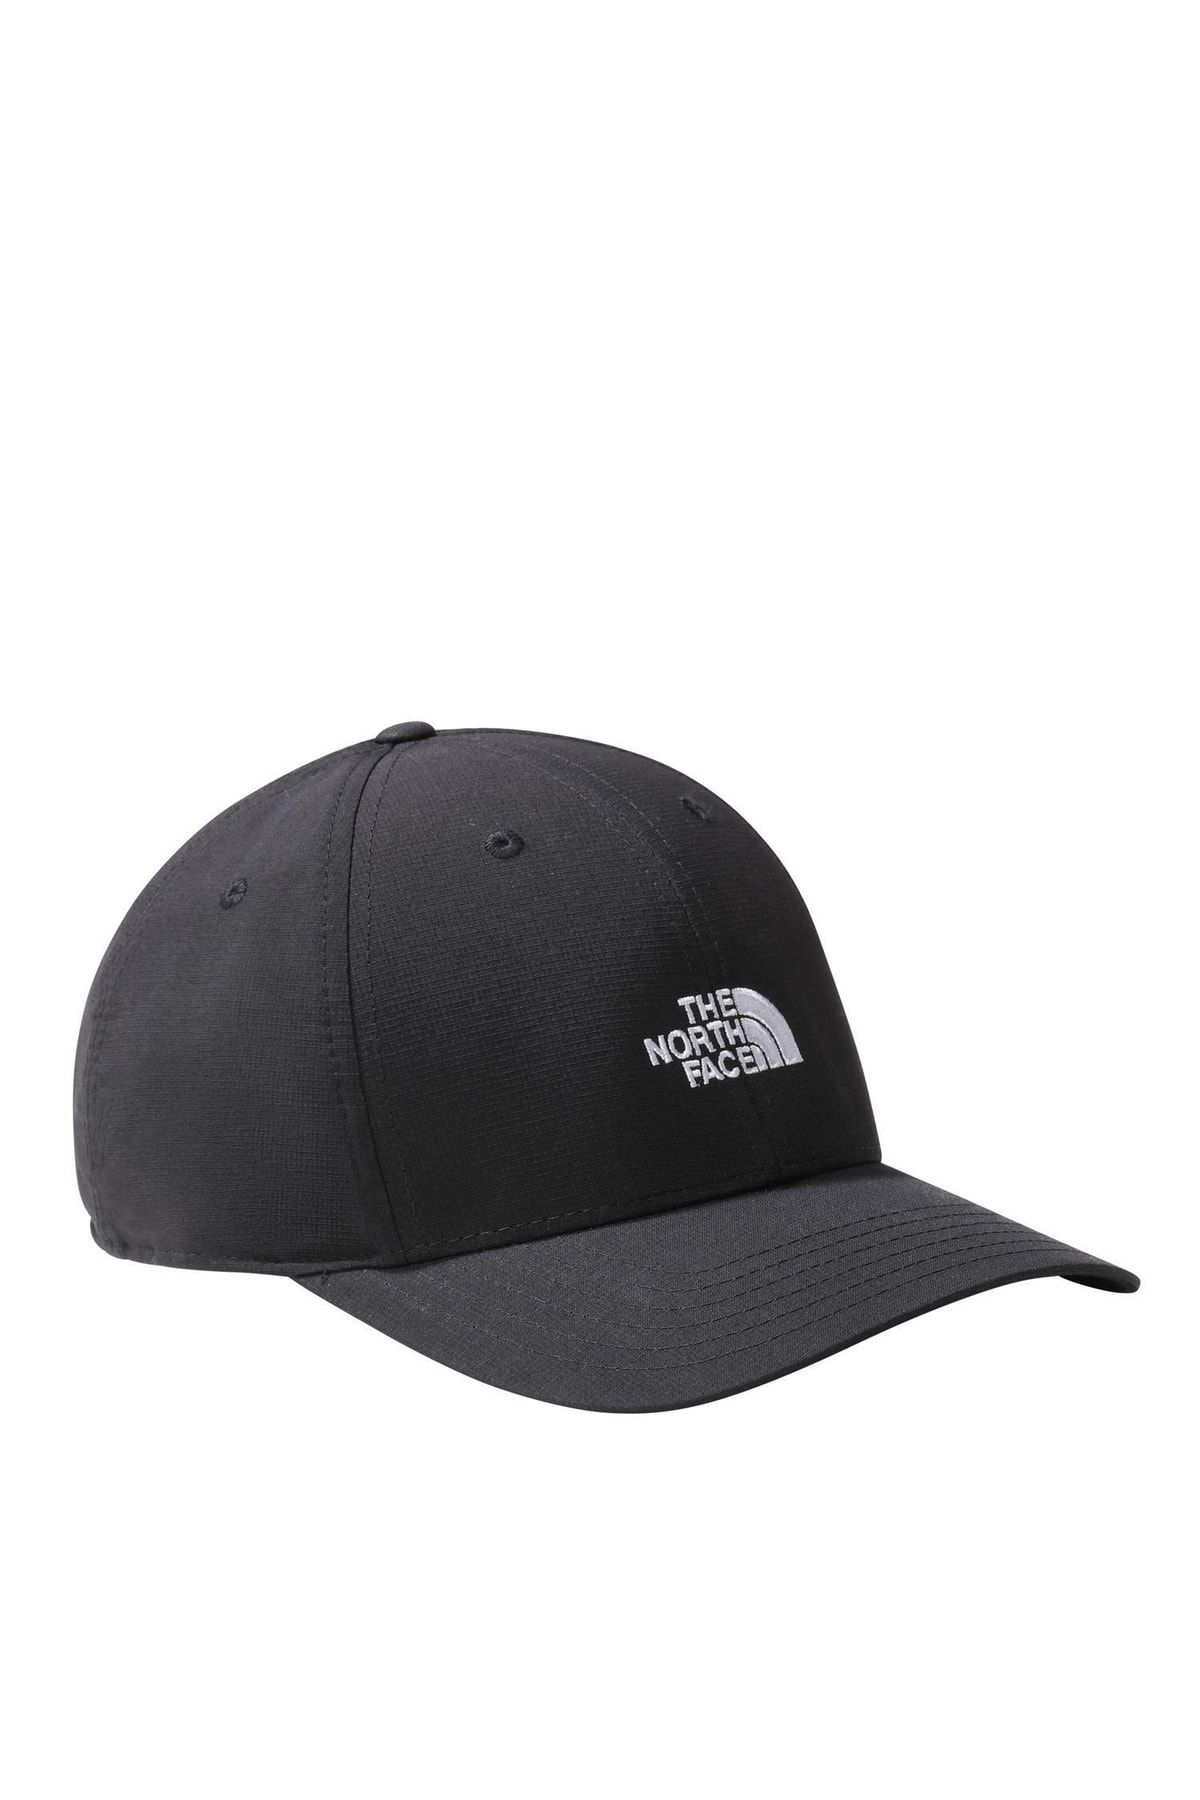 The North Face 66 Tech Hat Şapka Nf0a7whcky41